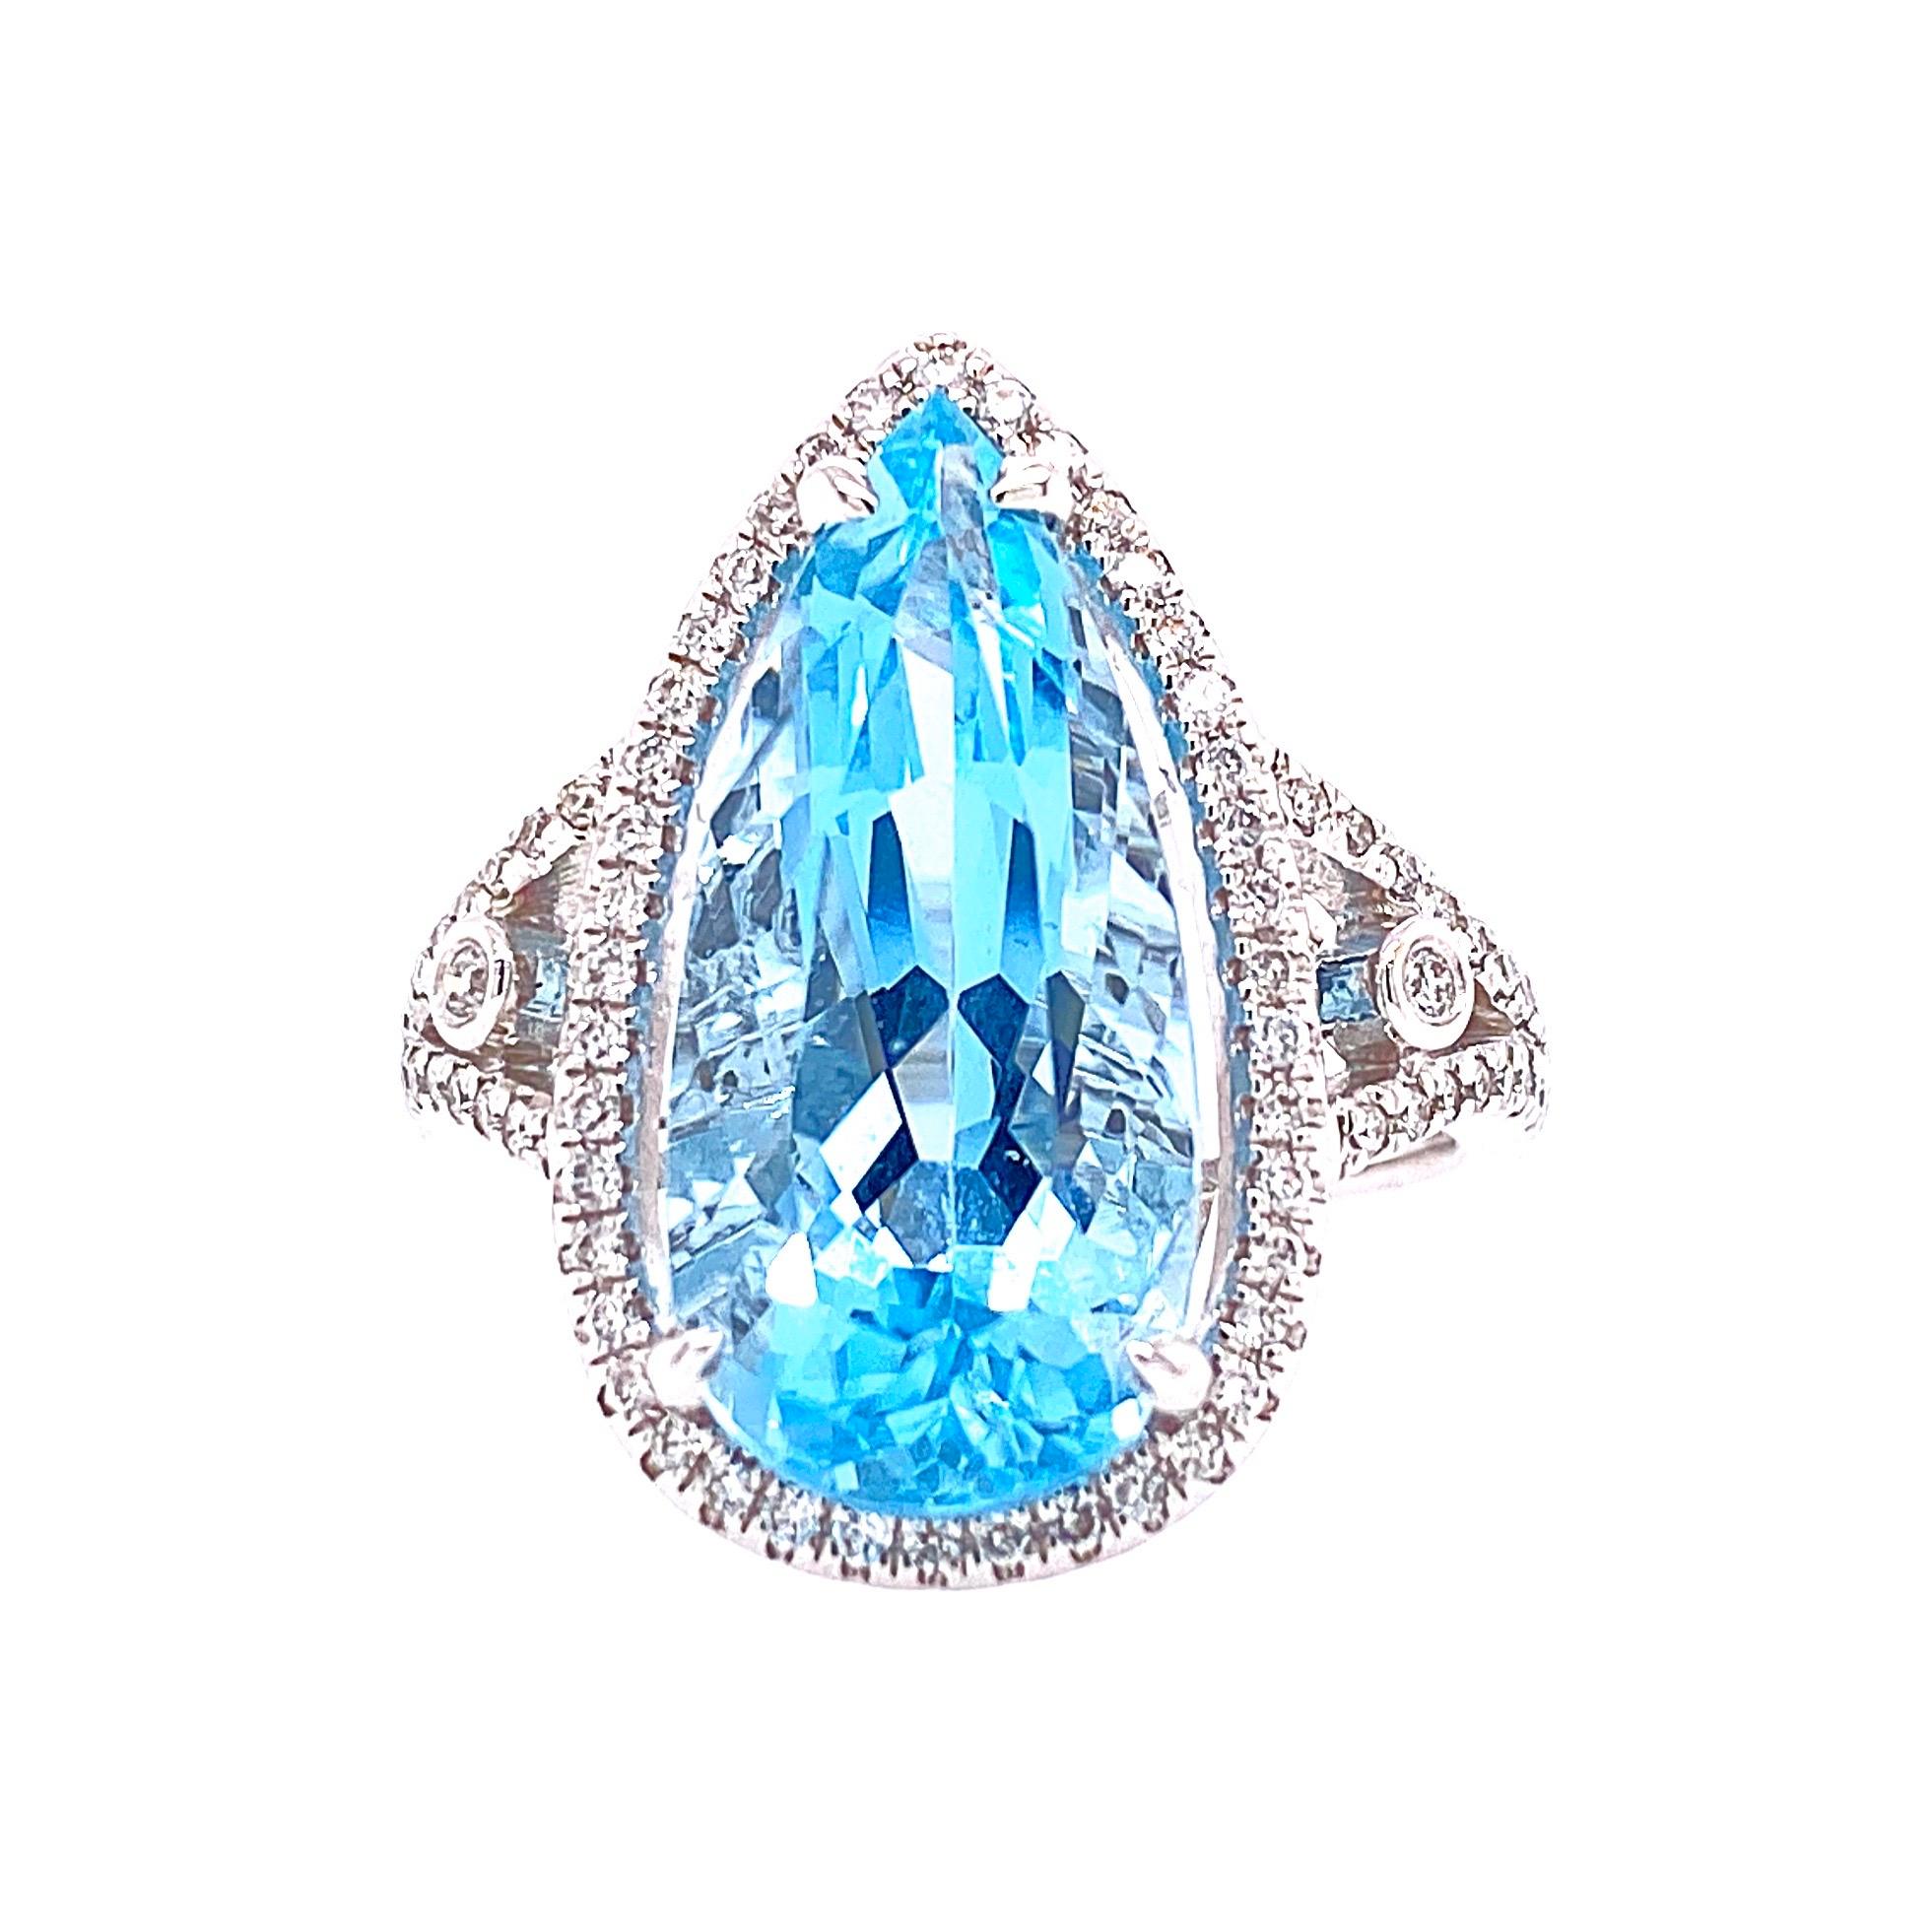 This stunning Cocktail Ring features a beautiful 5.50 Carat Pear Aquamarine with a Diamond Halo. The Aquamarine sits on a Double Diamond Shank and is set in 14K White Gold. Total Diamond Weight = 0.30 Carats. Ring Size is 6 1/2.